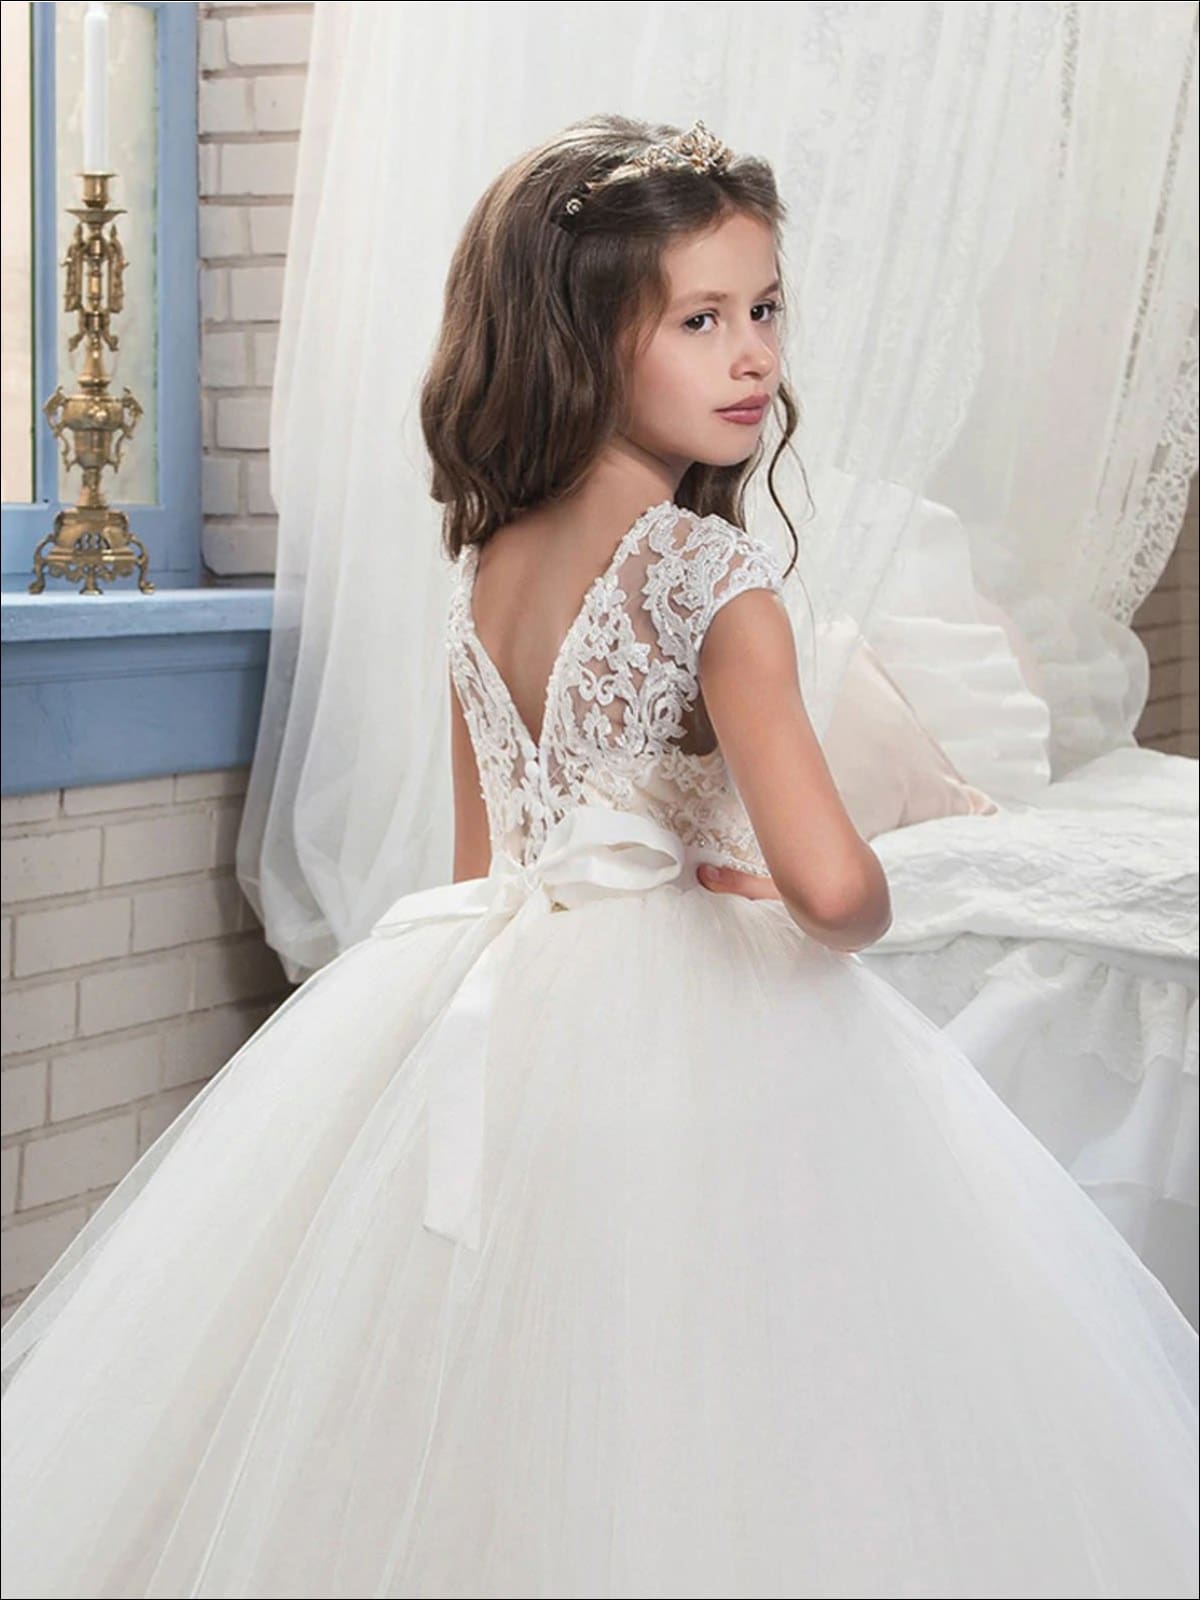 Girls Communion Dresses | Embroidered Bodice Tulle Flower Girl Gown ...